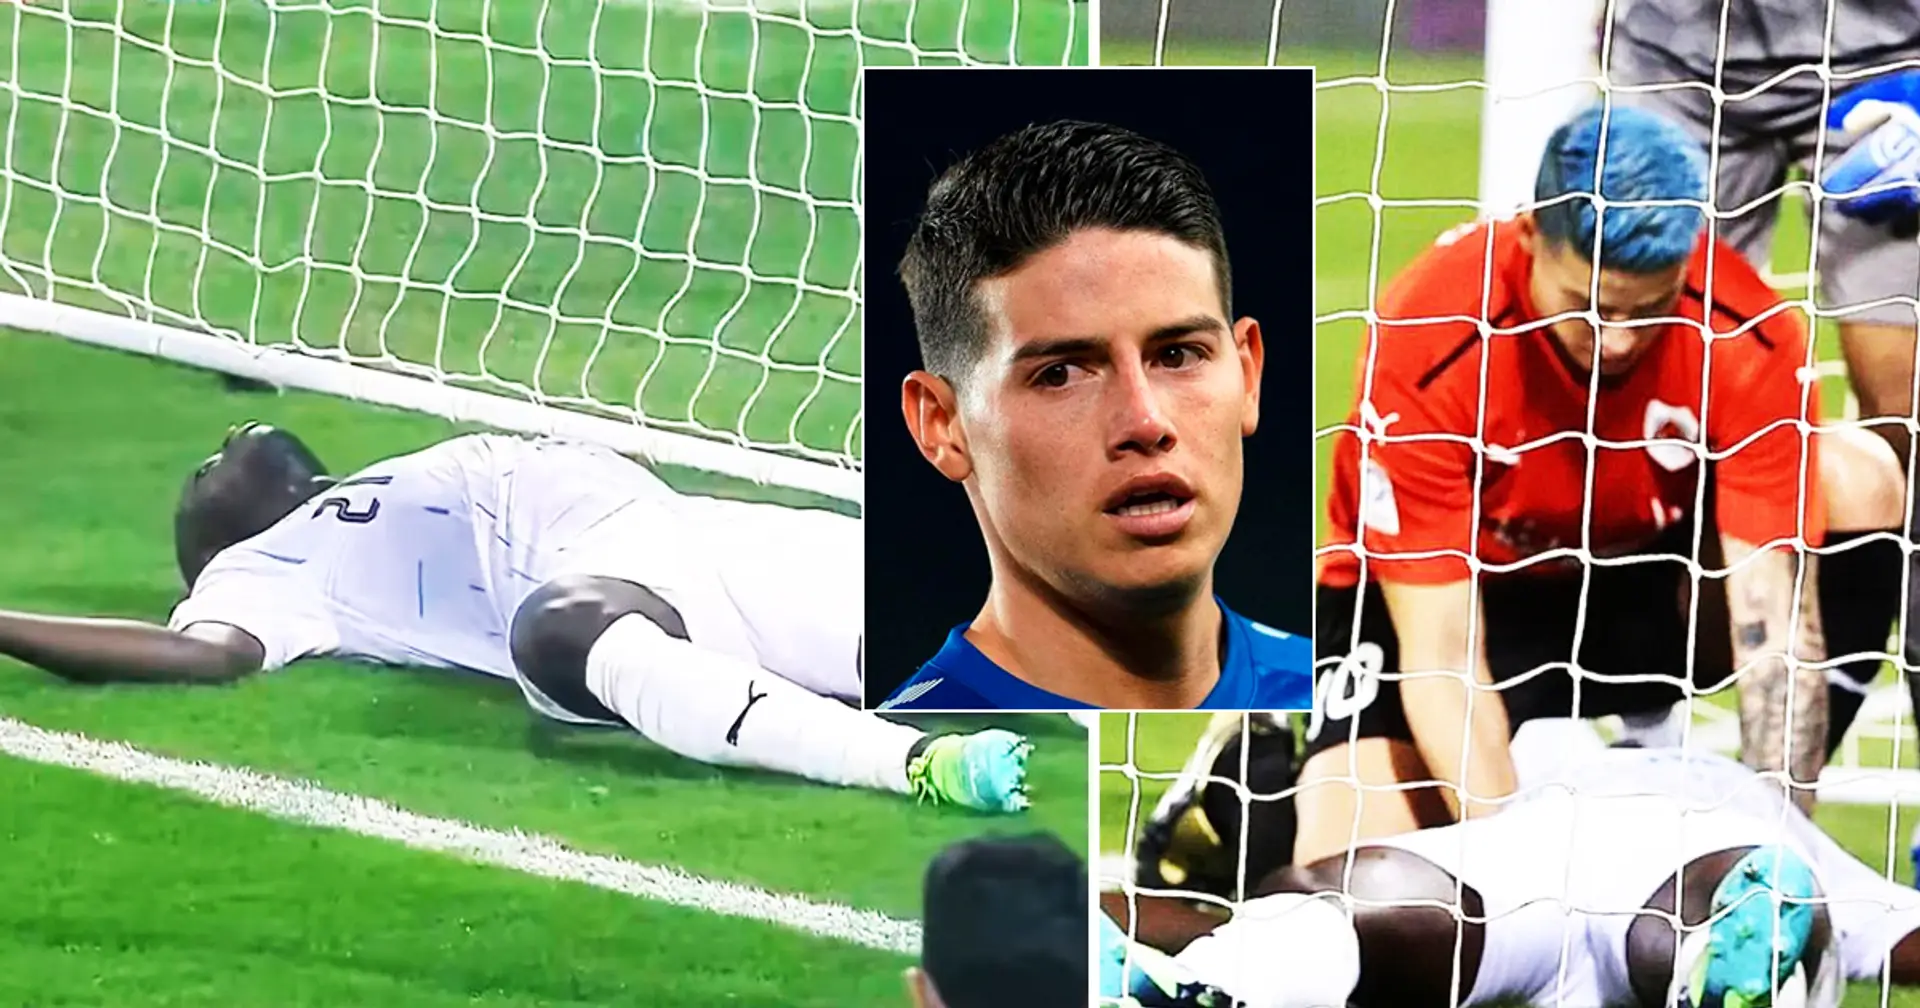 James Rodriguez performs life-saving move on opponent who suffered a cardiac arrest during game in Qatar 